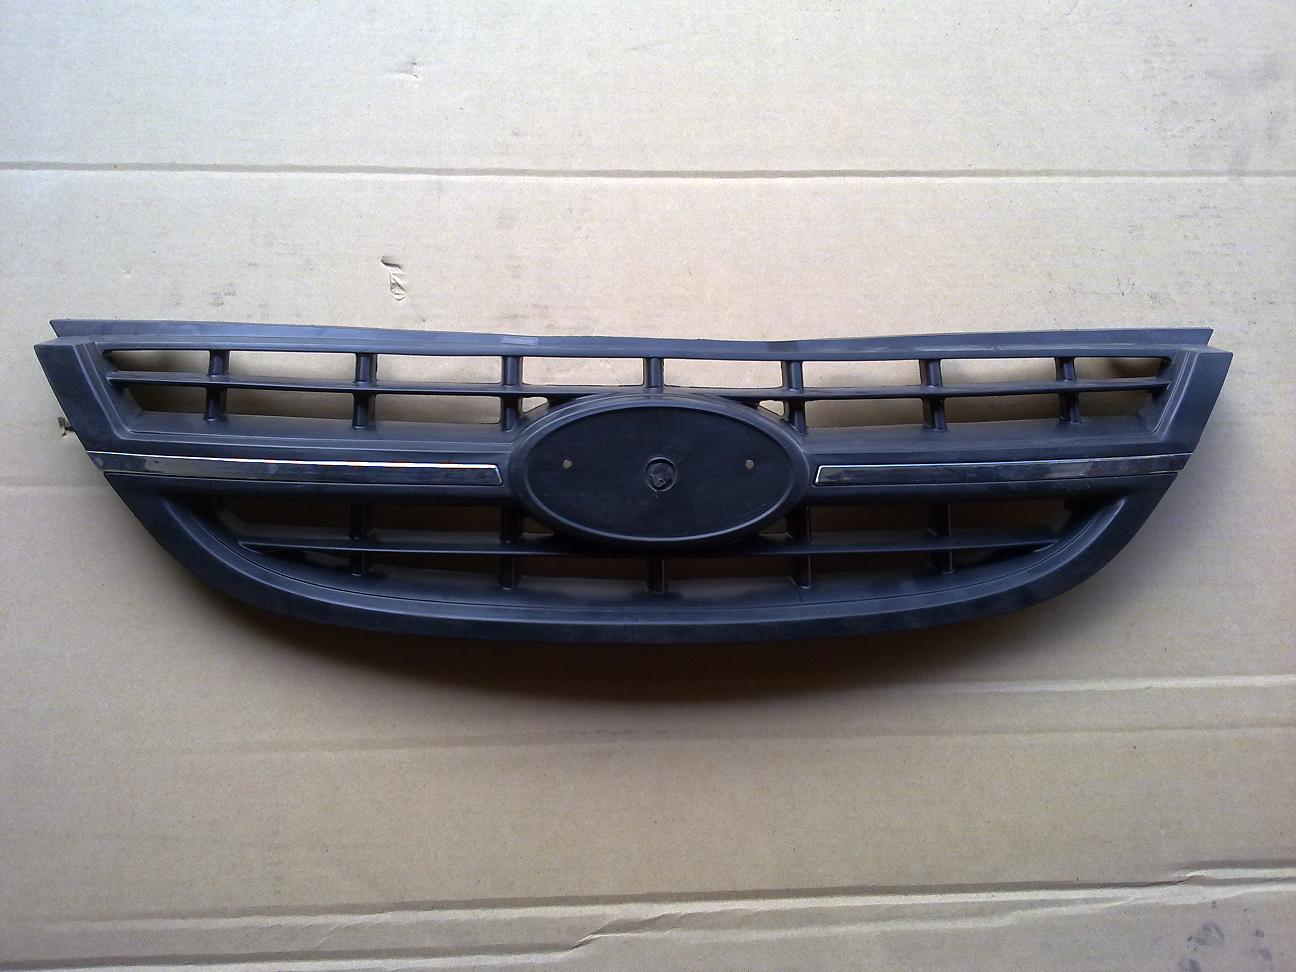 SPECTRA 04-06 Grille Black With Chrome Molding =5 05-06